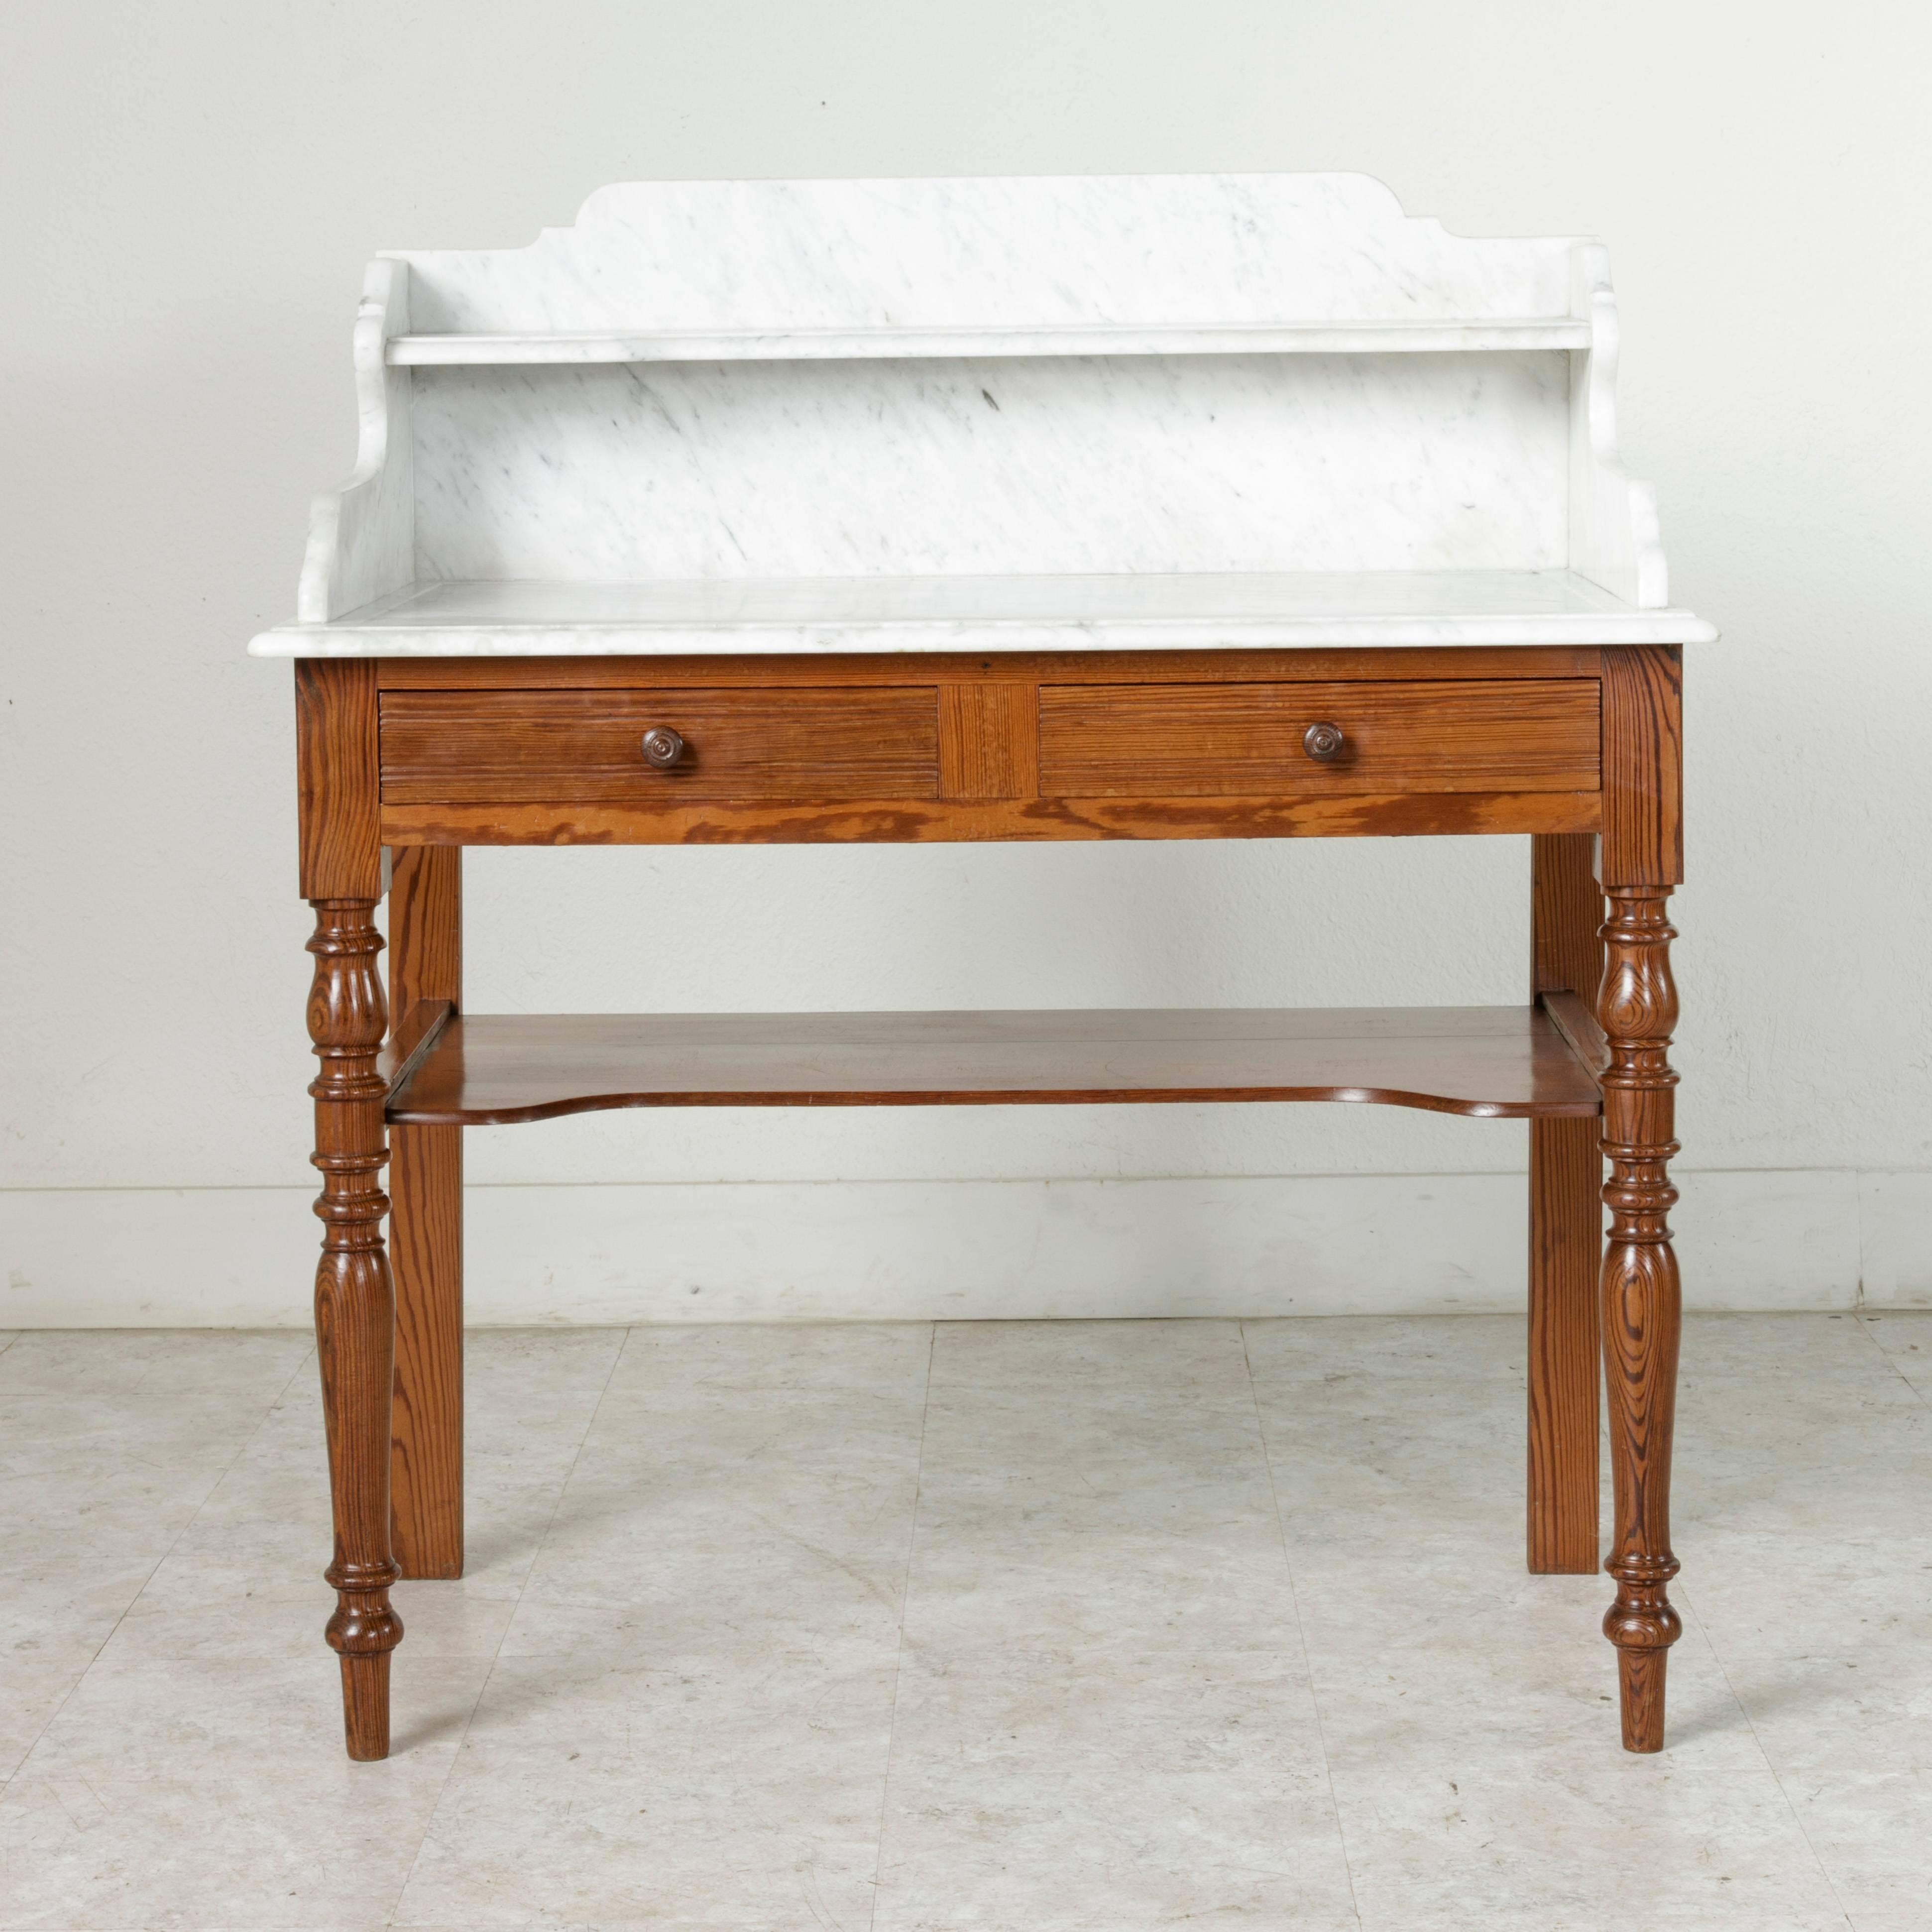 Originally part of the furnishings of a hotel in Bagnoles de l'Orne, a town in Normandy, France famous for its turn of the century therapeutic baths, this early 20th century pitch pine vanity features a beveled Carrara marble top with an upper